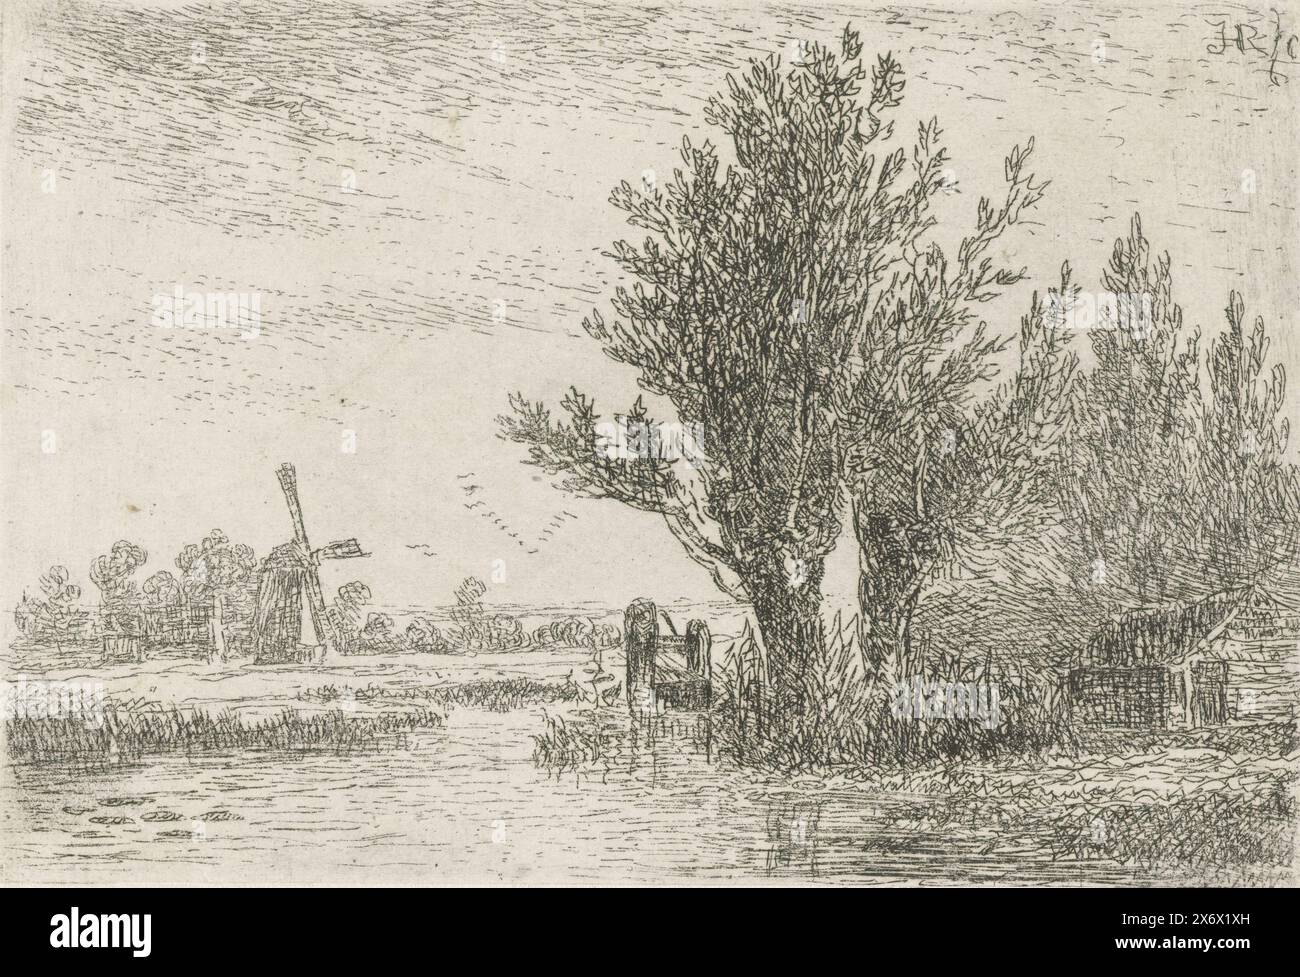 Lock, View of a river landscape with a lock and two pollard willows in the foreground. In the background the contours of a mill., print, print maker: Hermanus Jan Hendrik Rijkelijkhuizen, (mentioned on object), Utrecht, 1823 - 1883, paper, etching, height, 78 mm × width, 114 mm Stock Photo